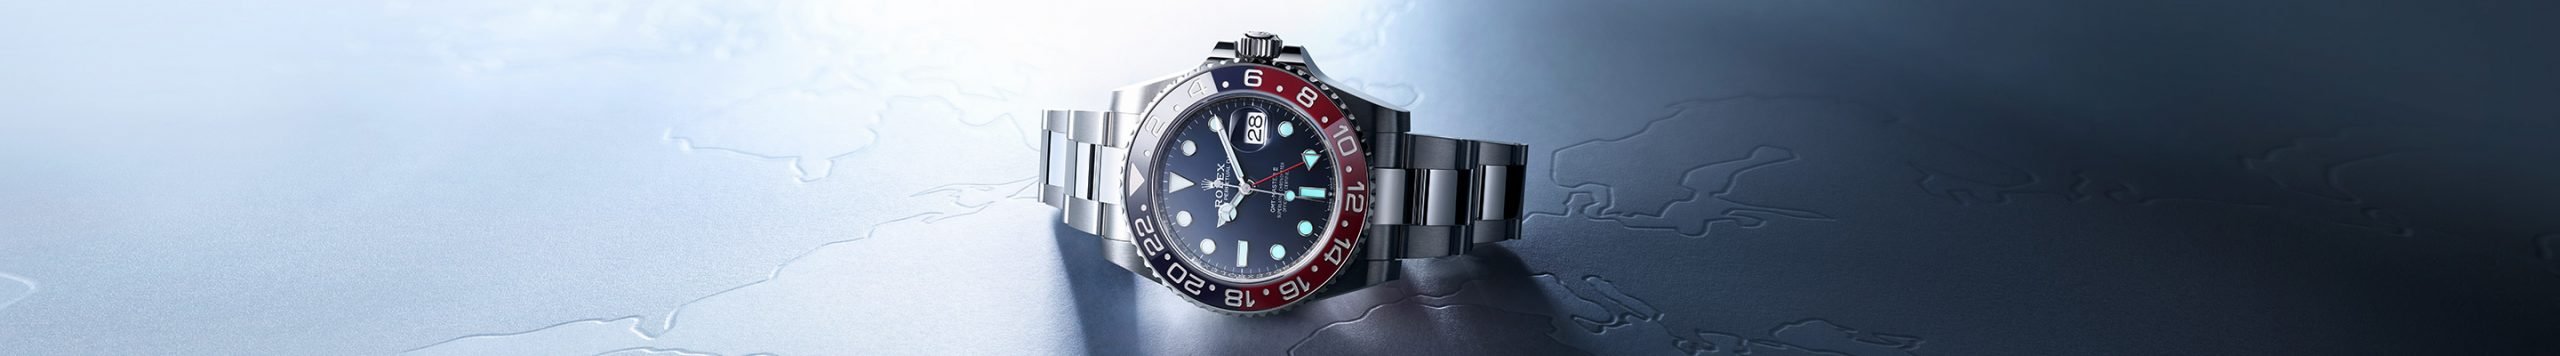 Oyster Perpetual GMT Master II - testata